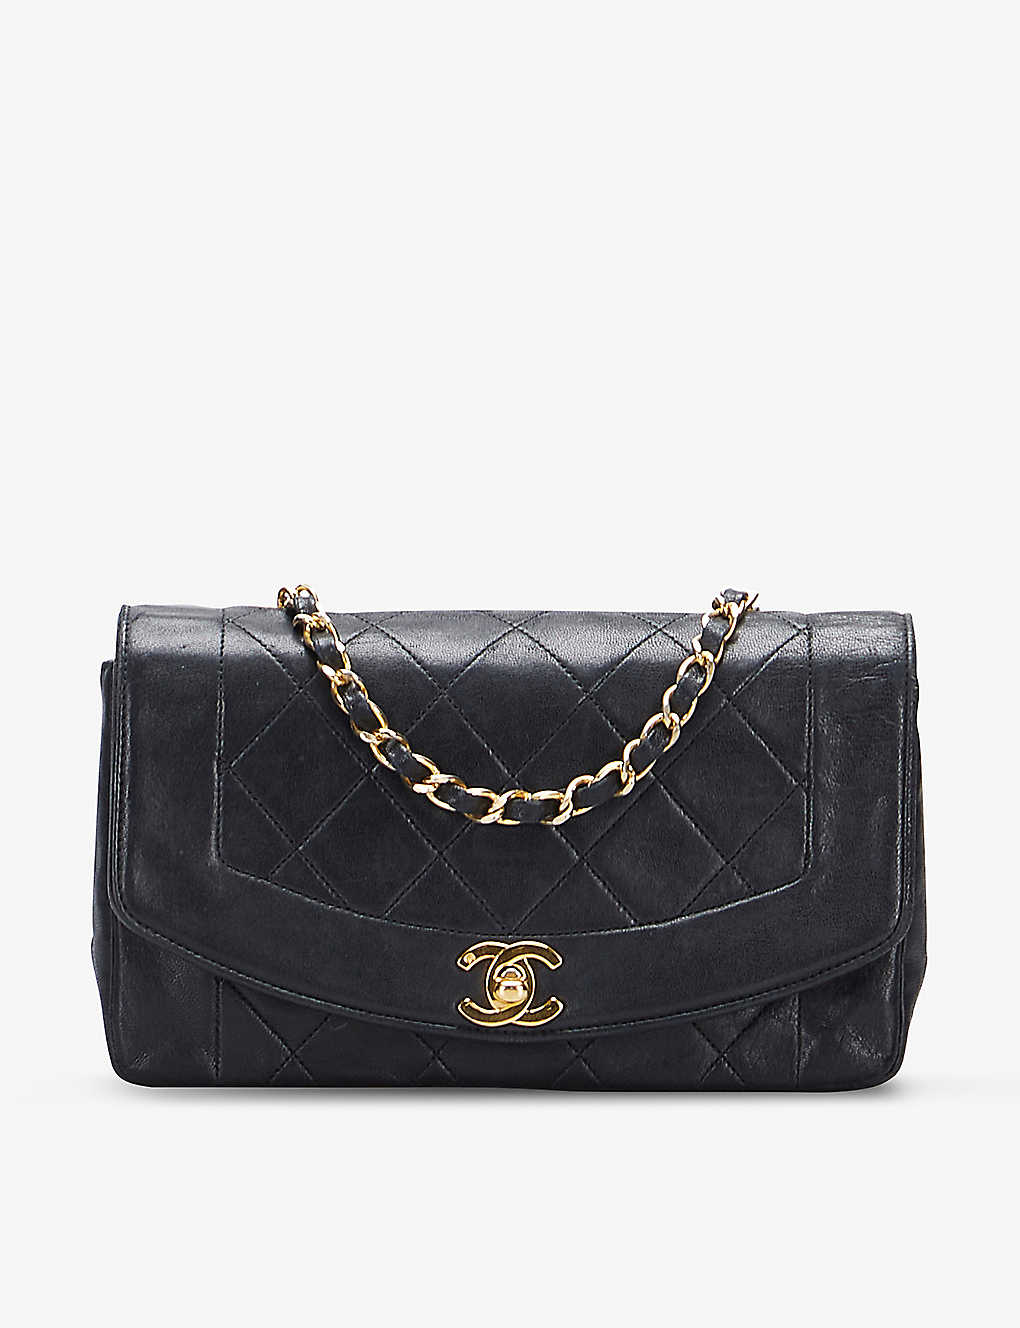 Reselfridges Women'S Black Pre-Loved Chanel Diana Small Leather